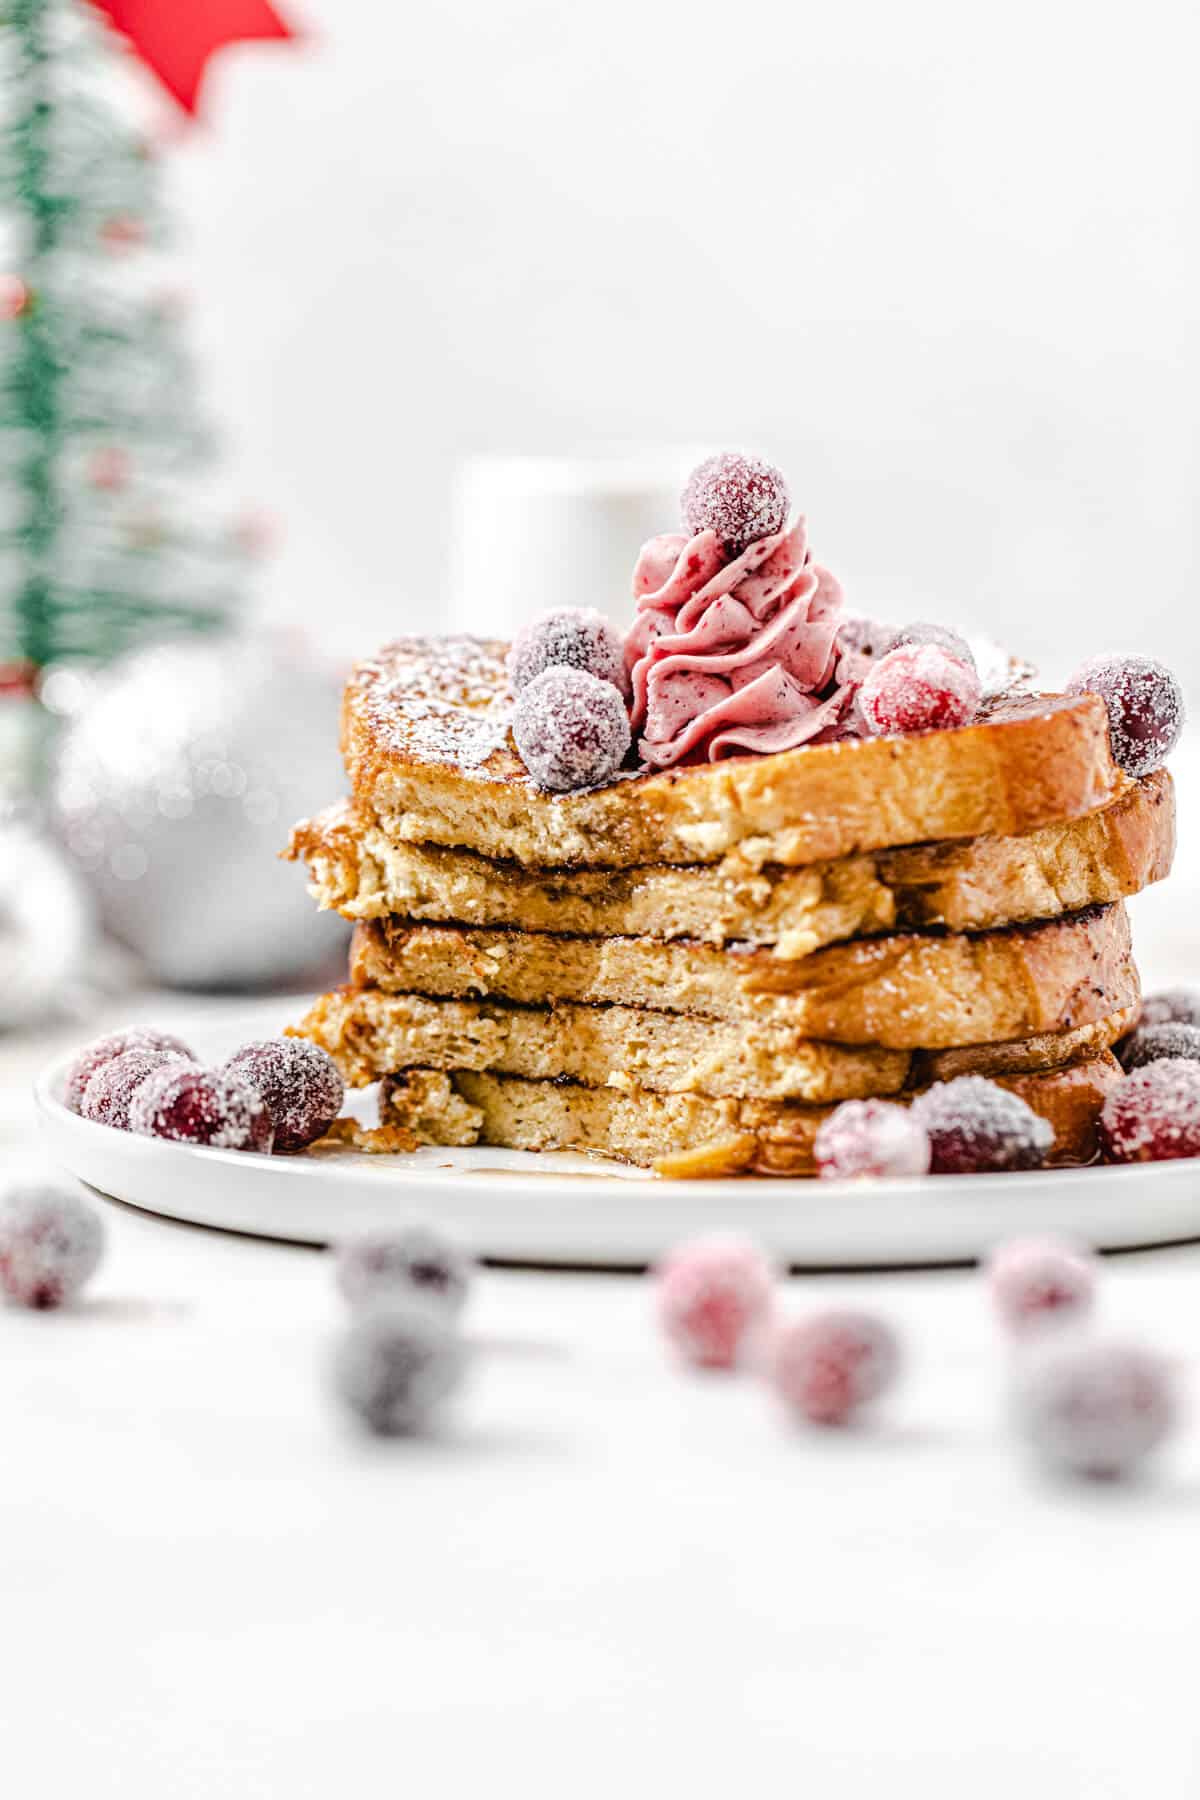 stack of French toast topped with cranberries with the front half sliced off